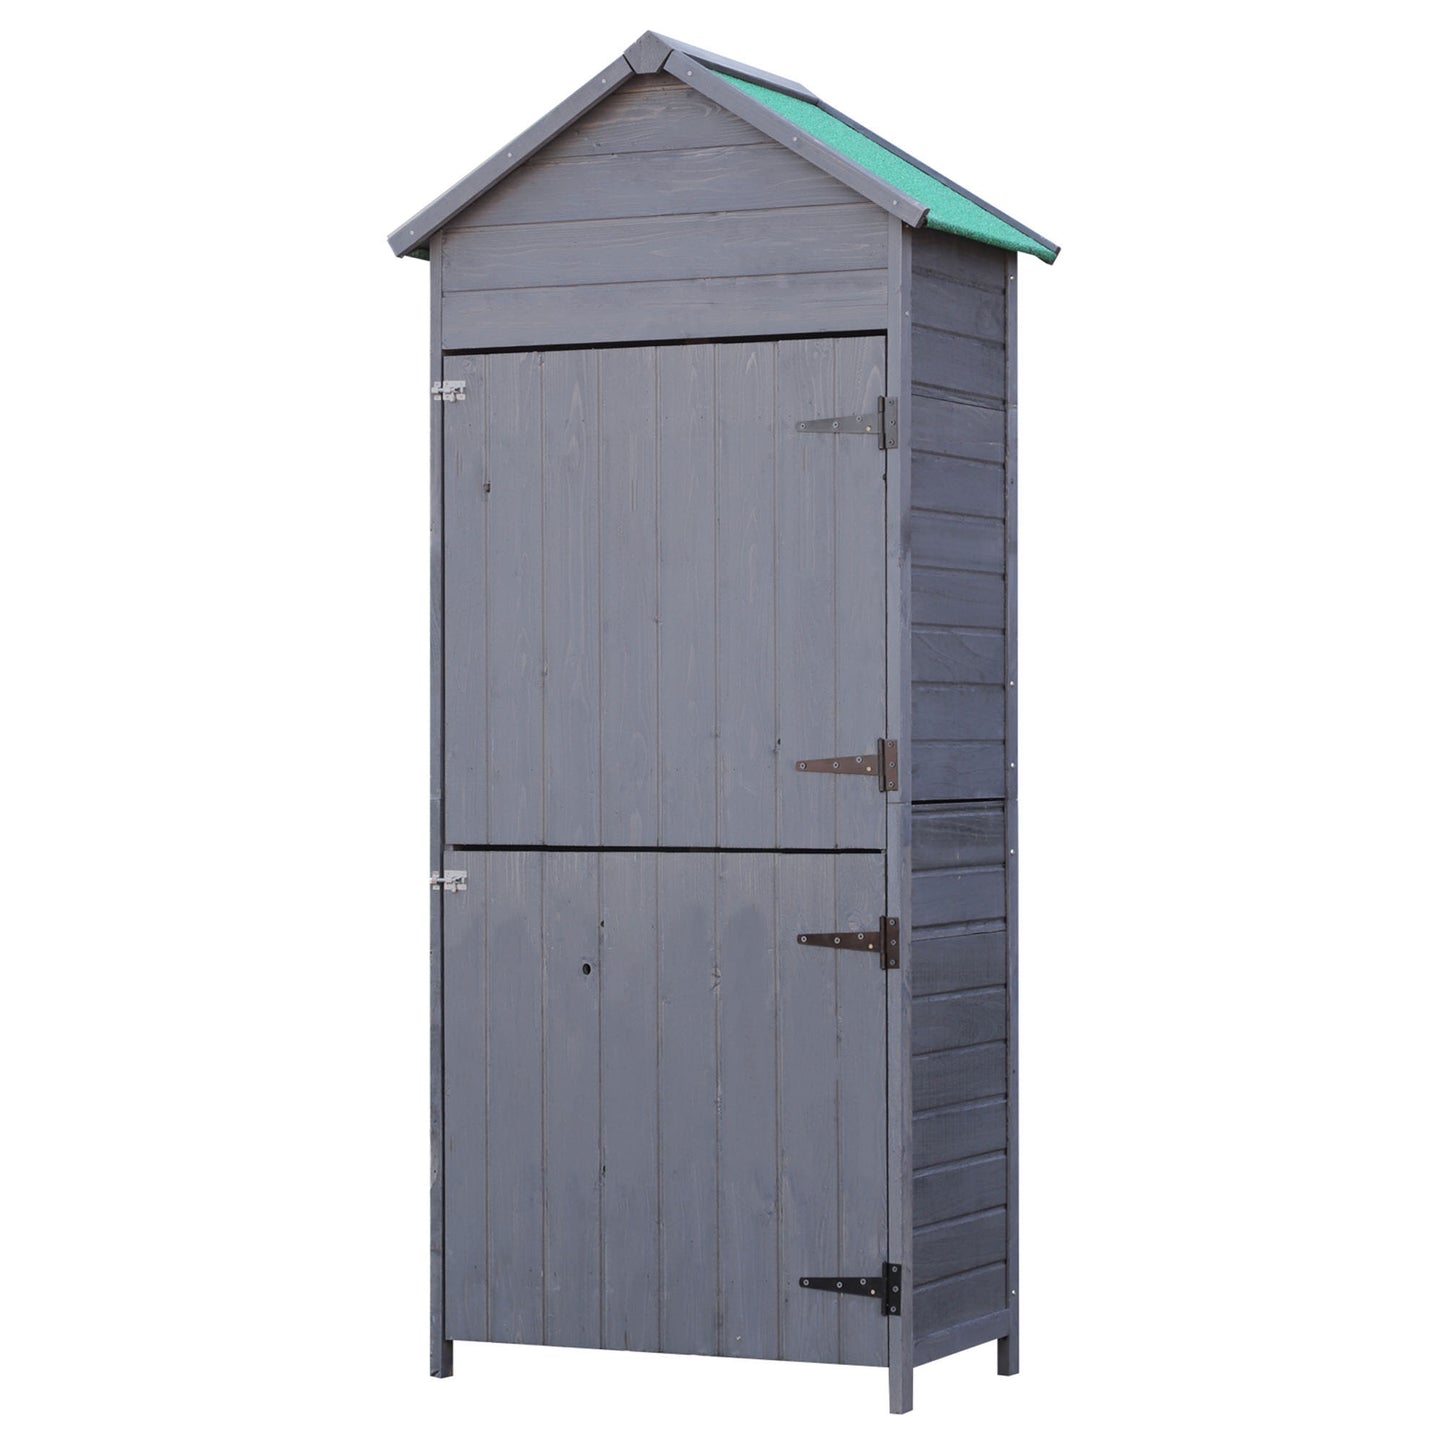 Outsunny 1.7 x 2.1ft Fir Wood Two Door Narrow Garden Shed - Grey